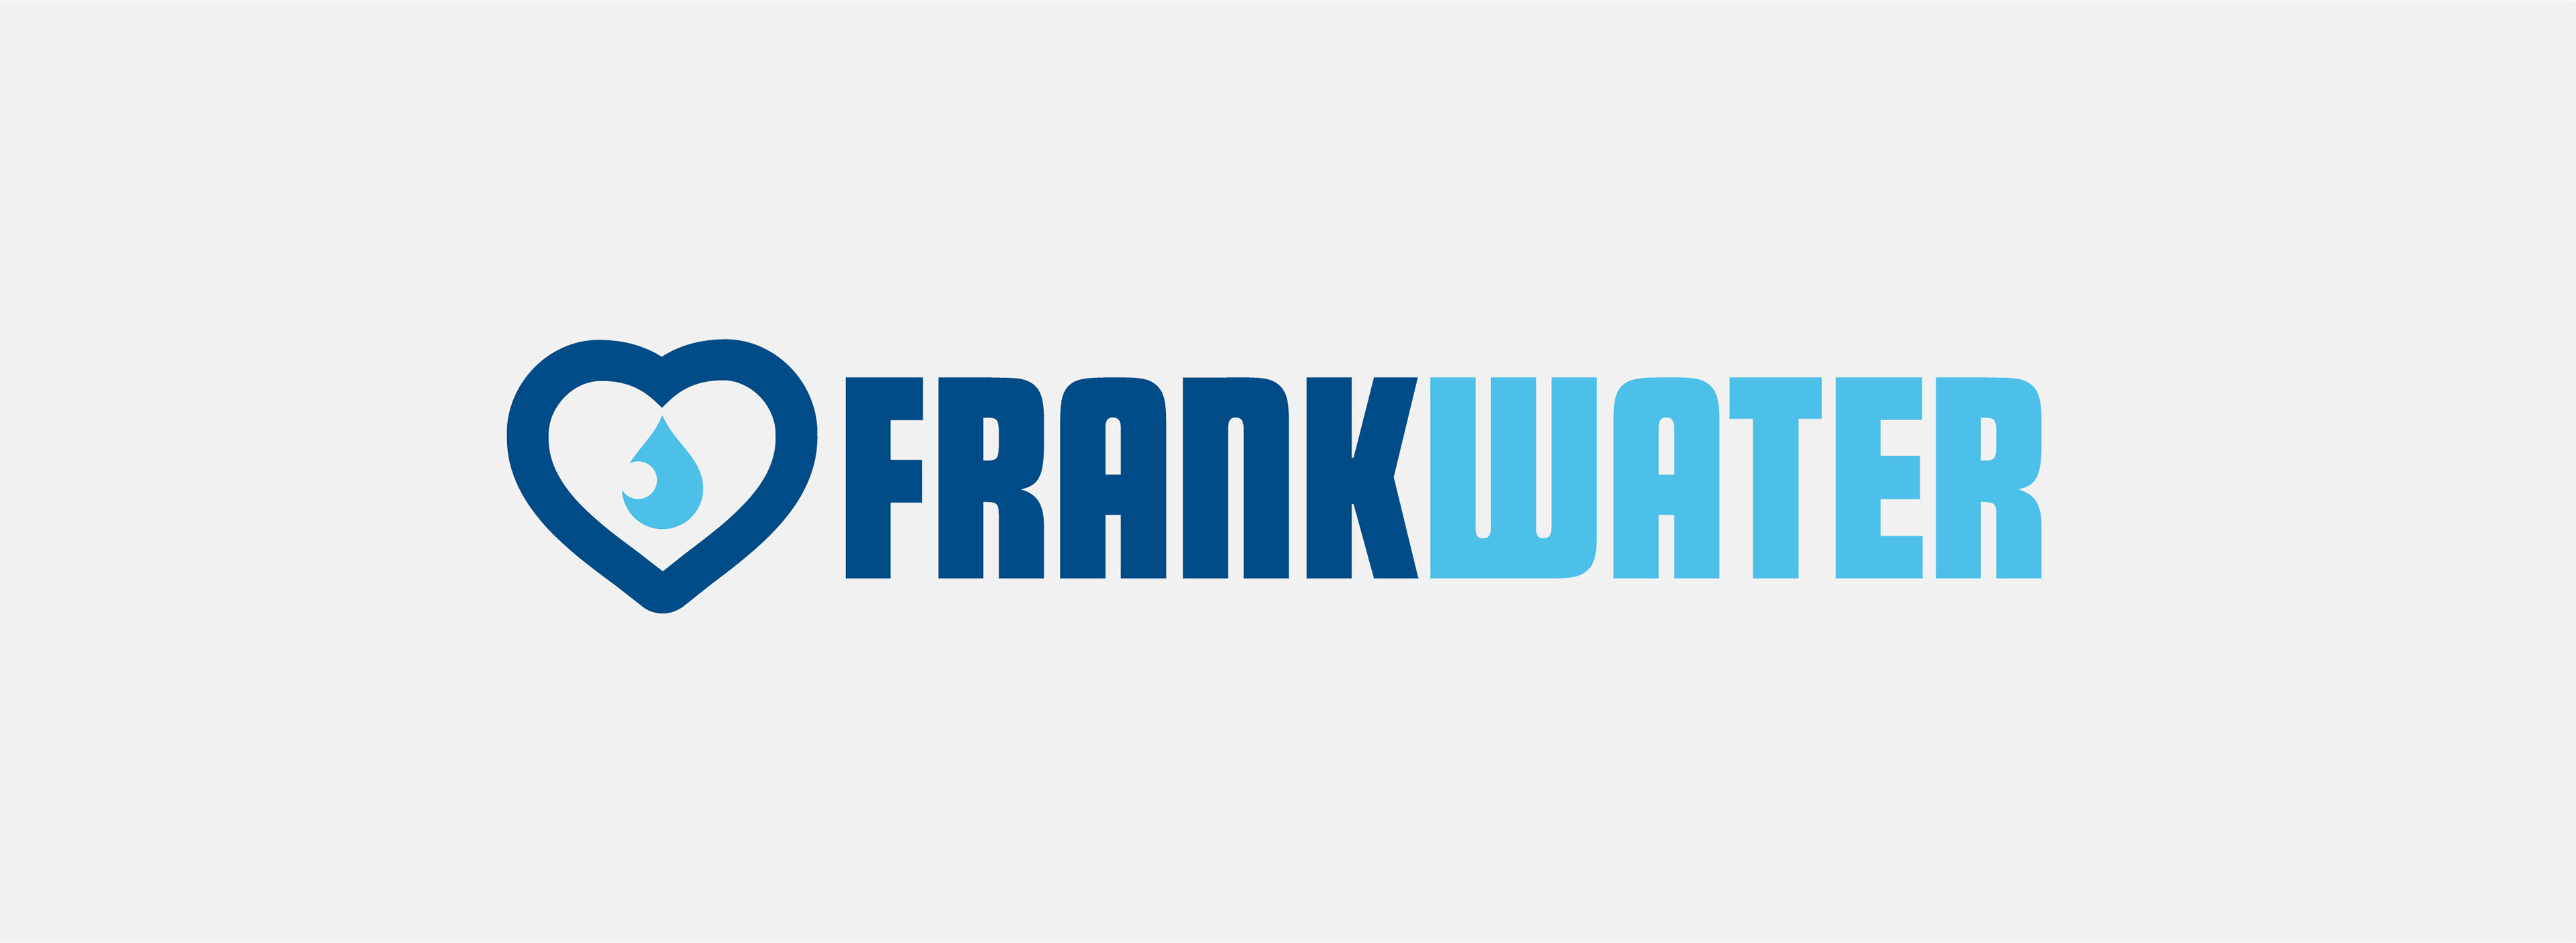 Frank Water